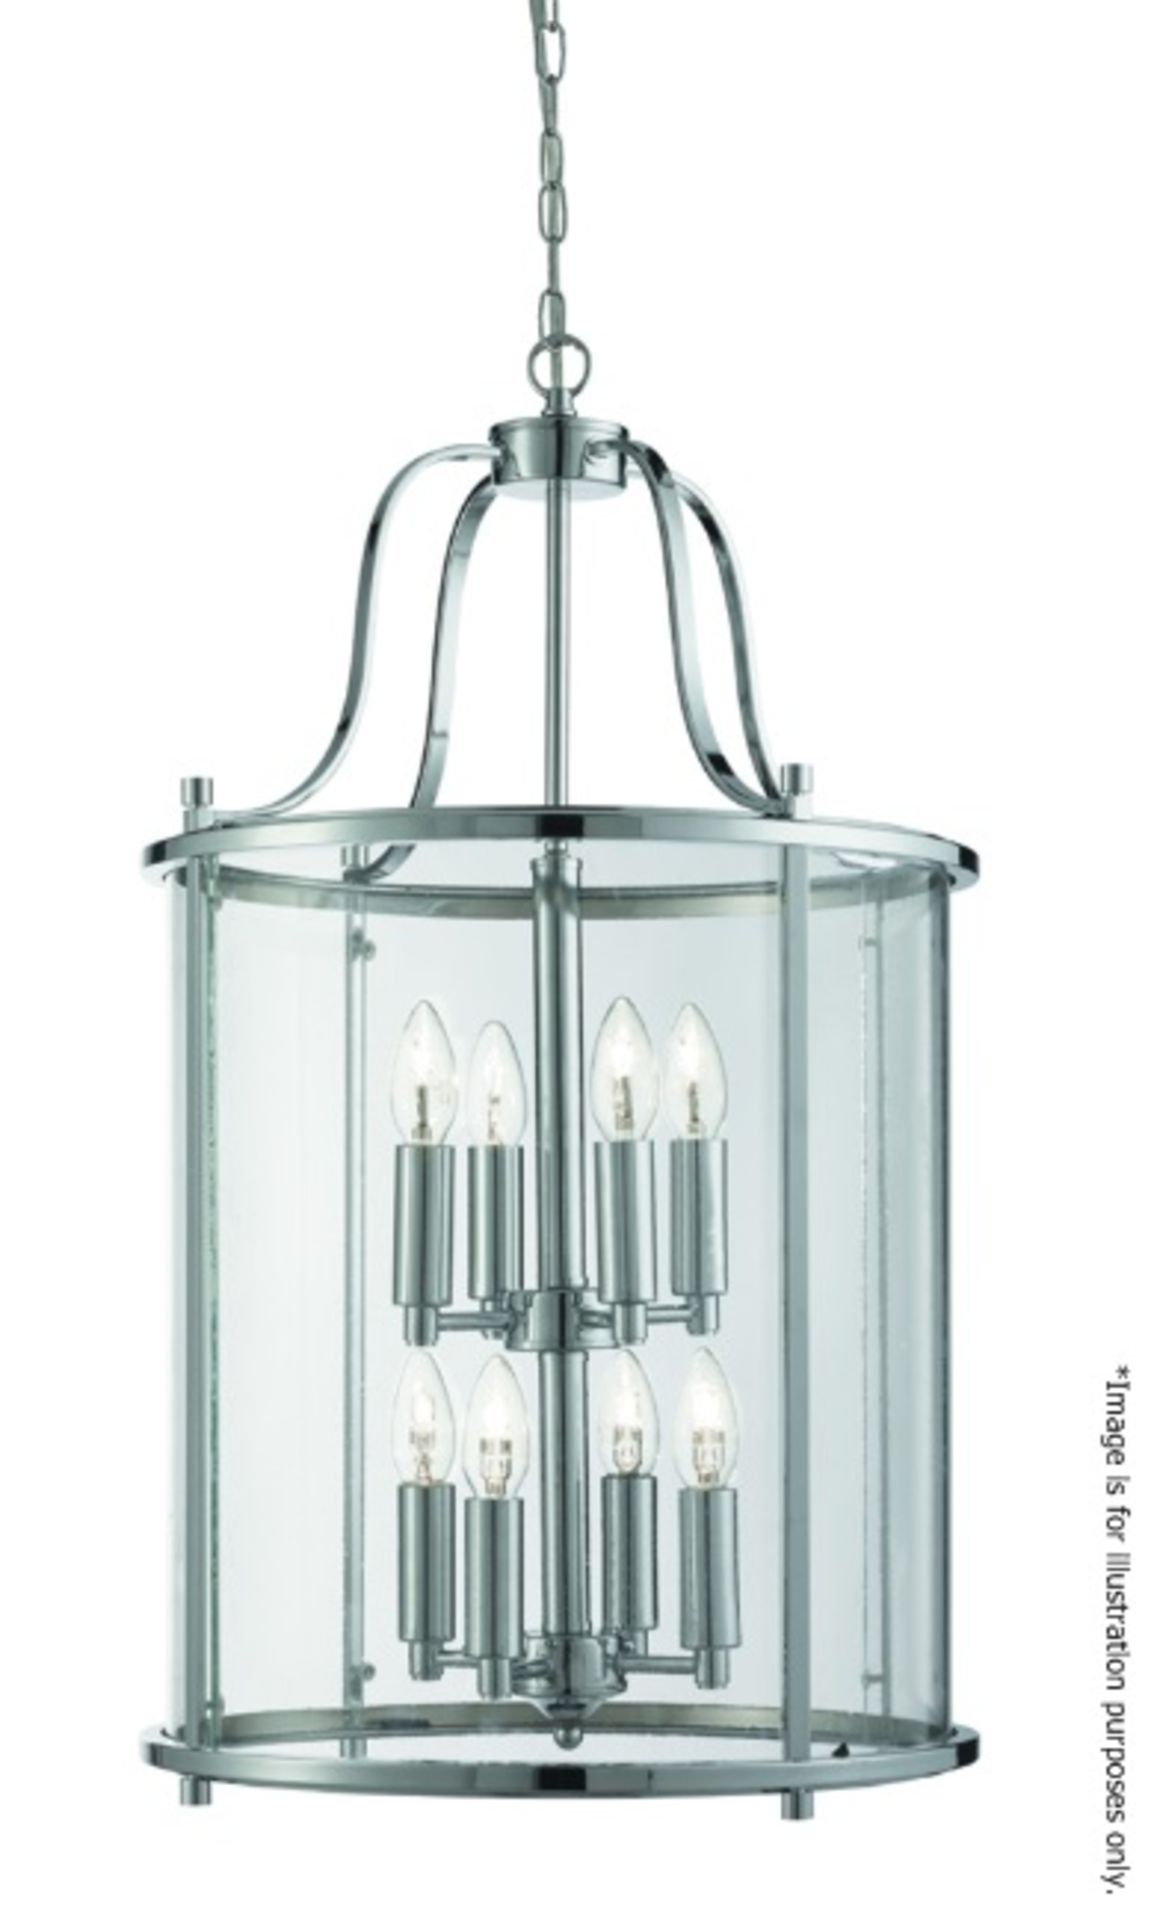 1 x Victorian Lantern Chrome 8-Light Ceiling Fitting With Clear Glass Panels - RRP £576.00